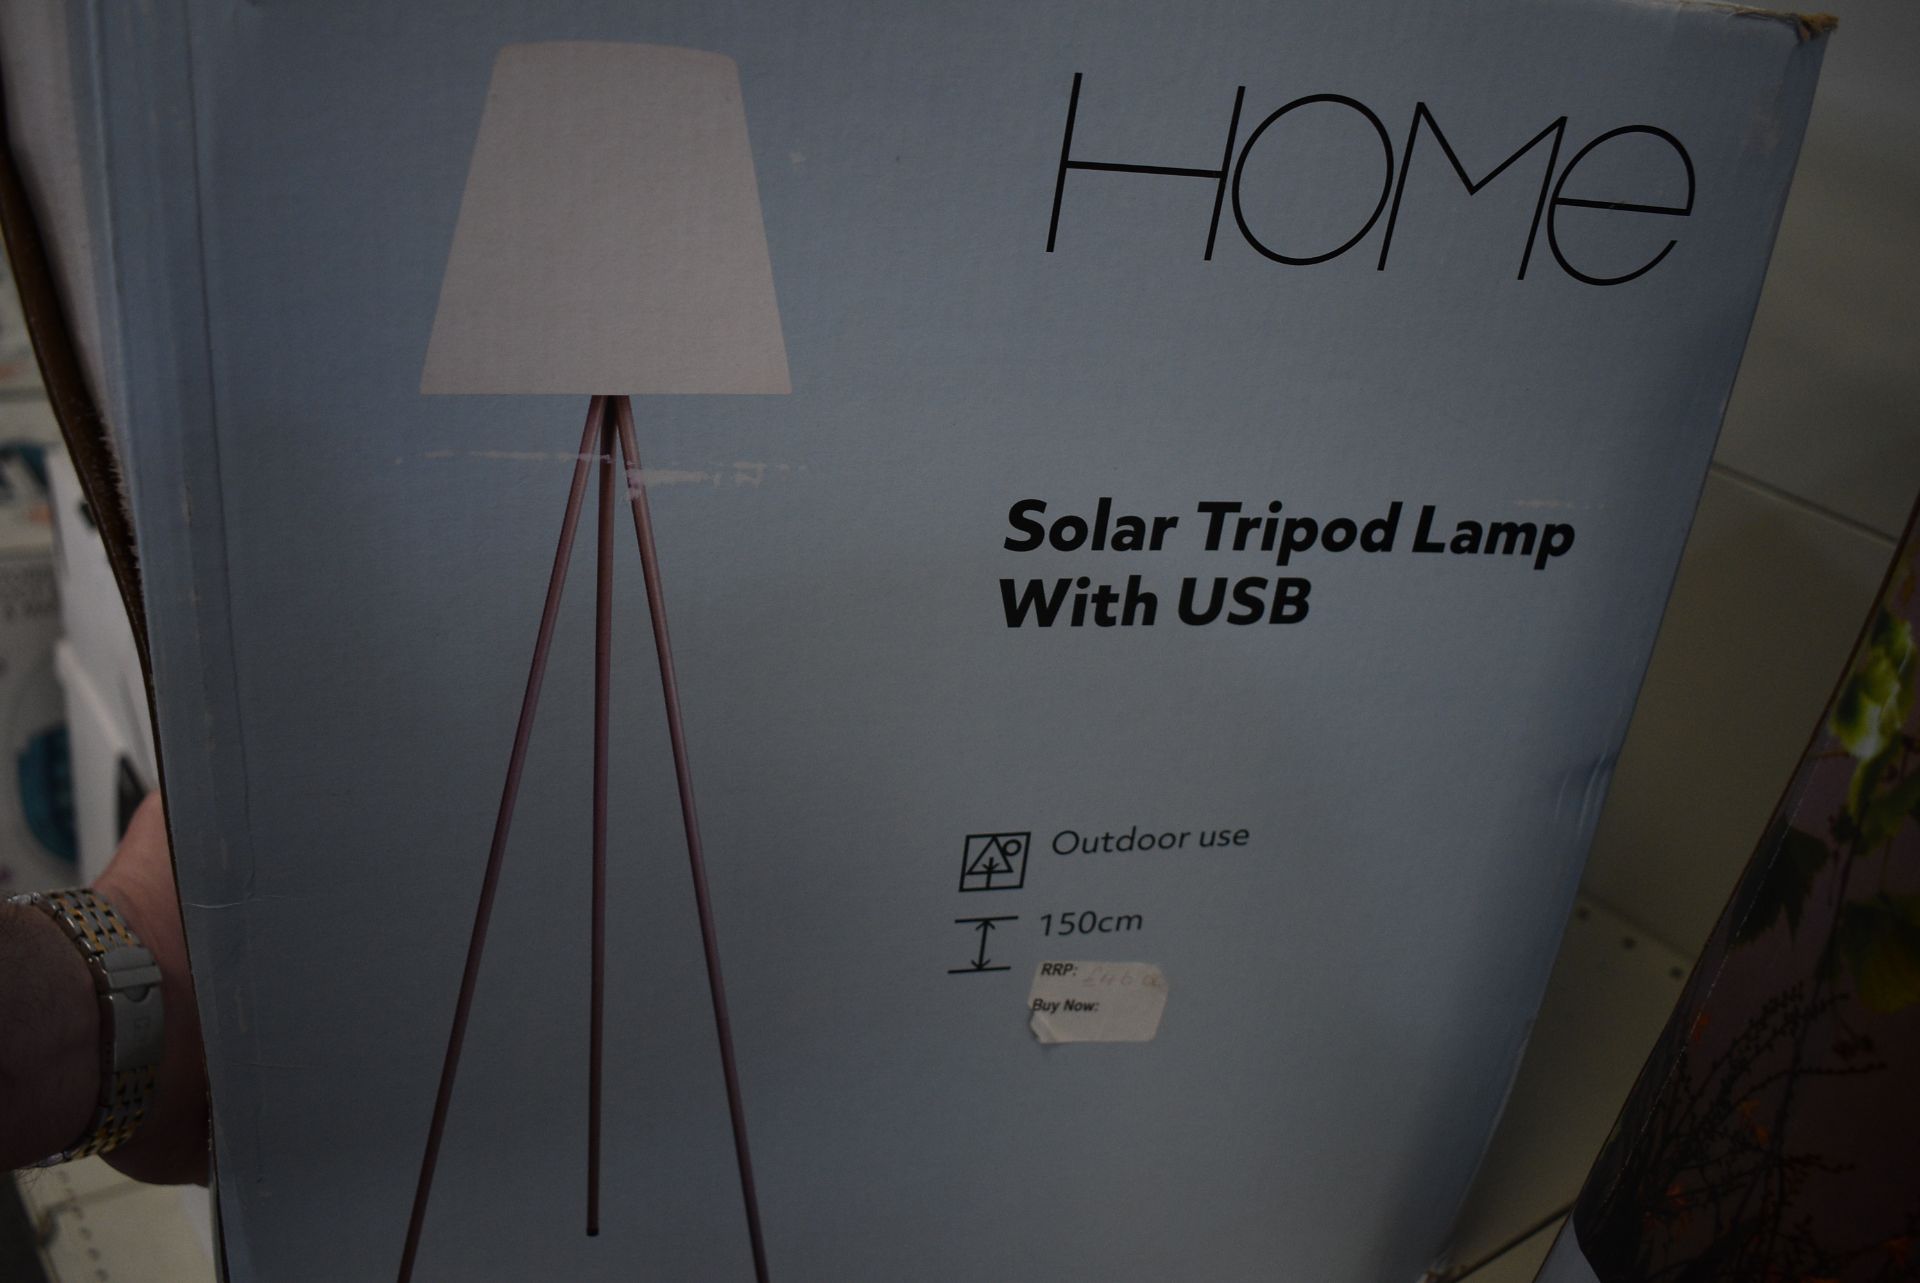 Solar Tripod Lamp with USB - Image 3 of 4